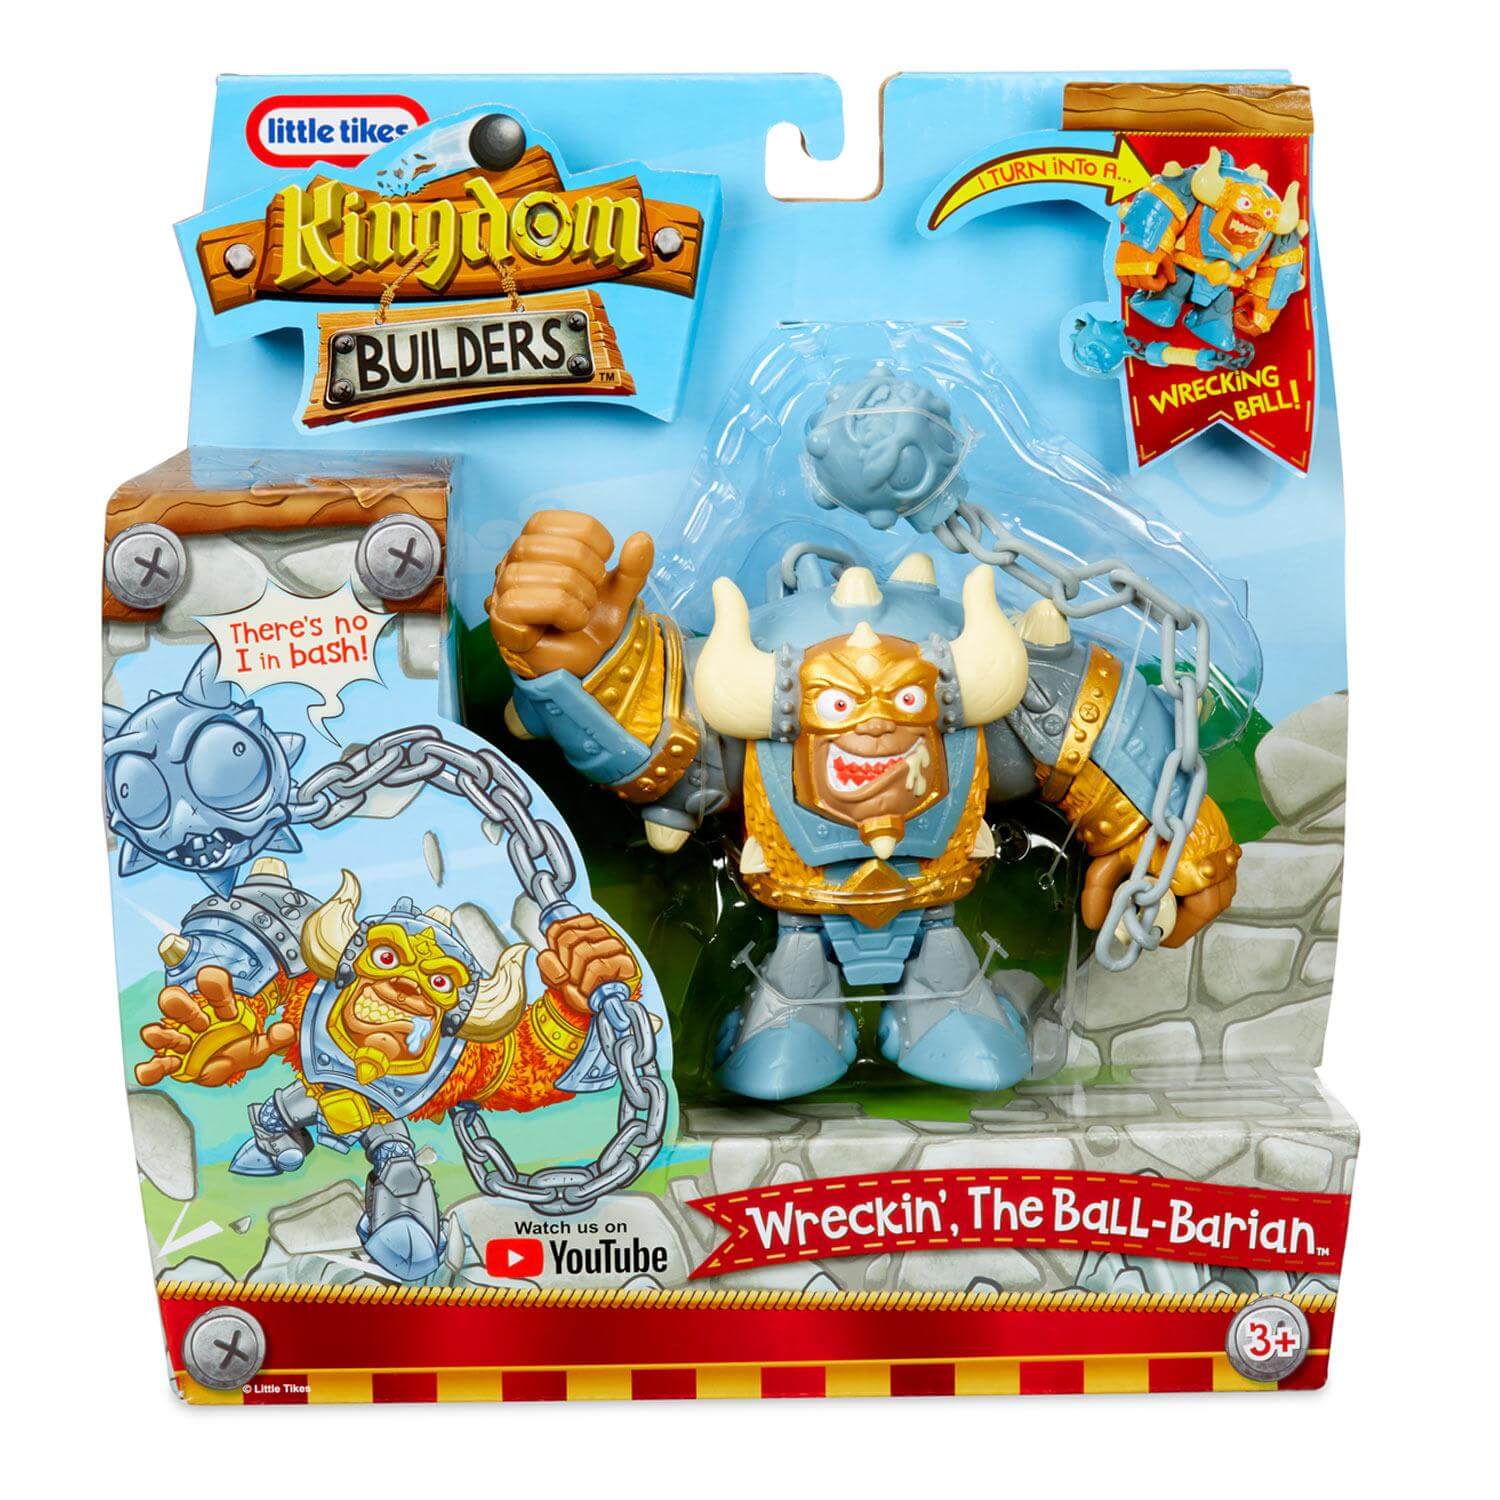 Front view of the Kingdom Builders Wreckin The Ball-Barian package.